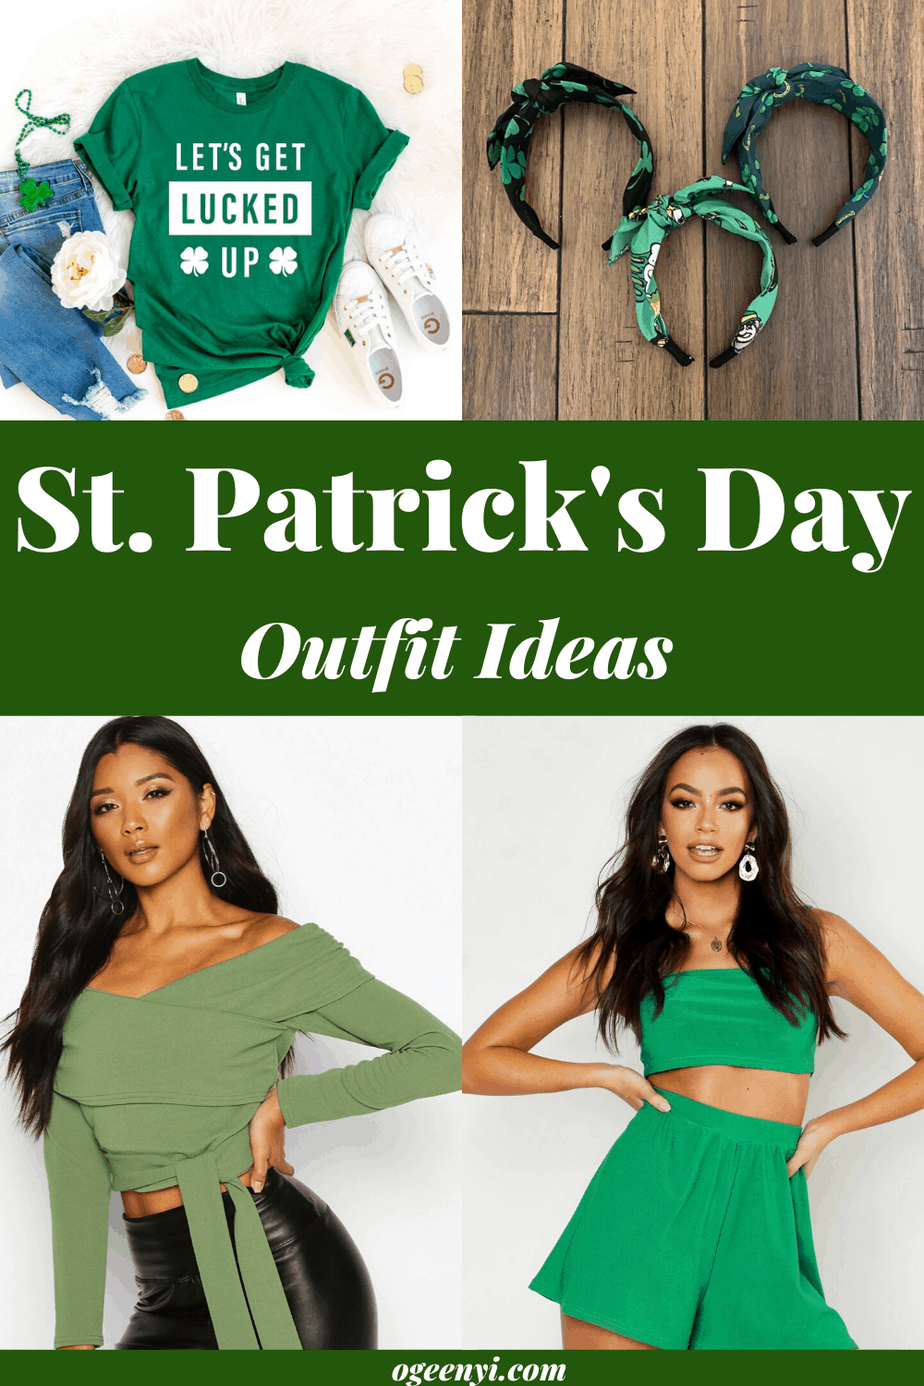 St. Patrick’s Day Outfit Ideas: How To Look Fabulous In Green